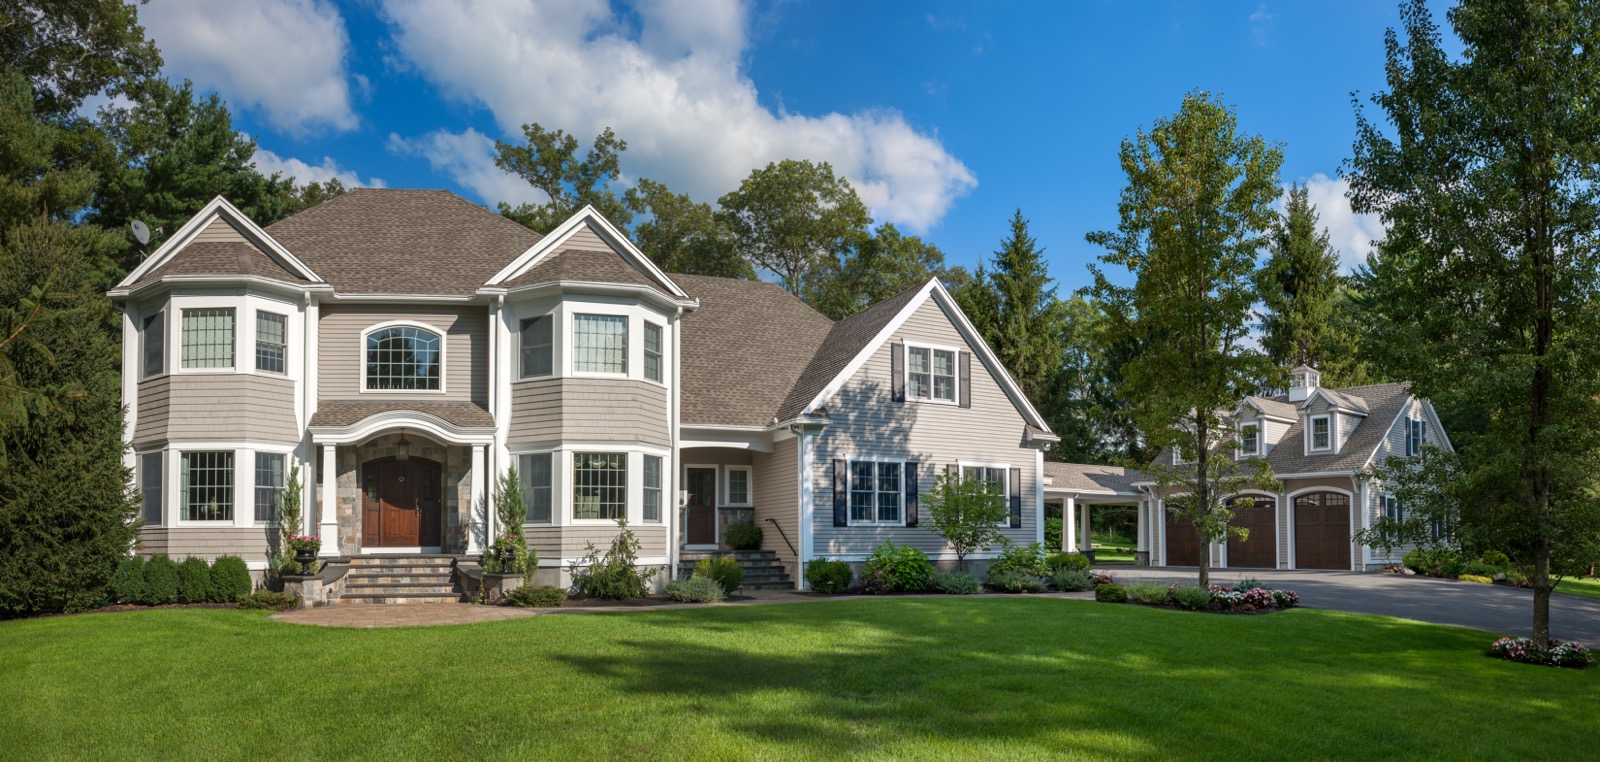 Understanding Zoning Regulations To Make Your Old Home Dream A Reality